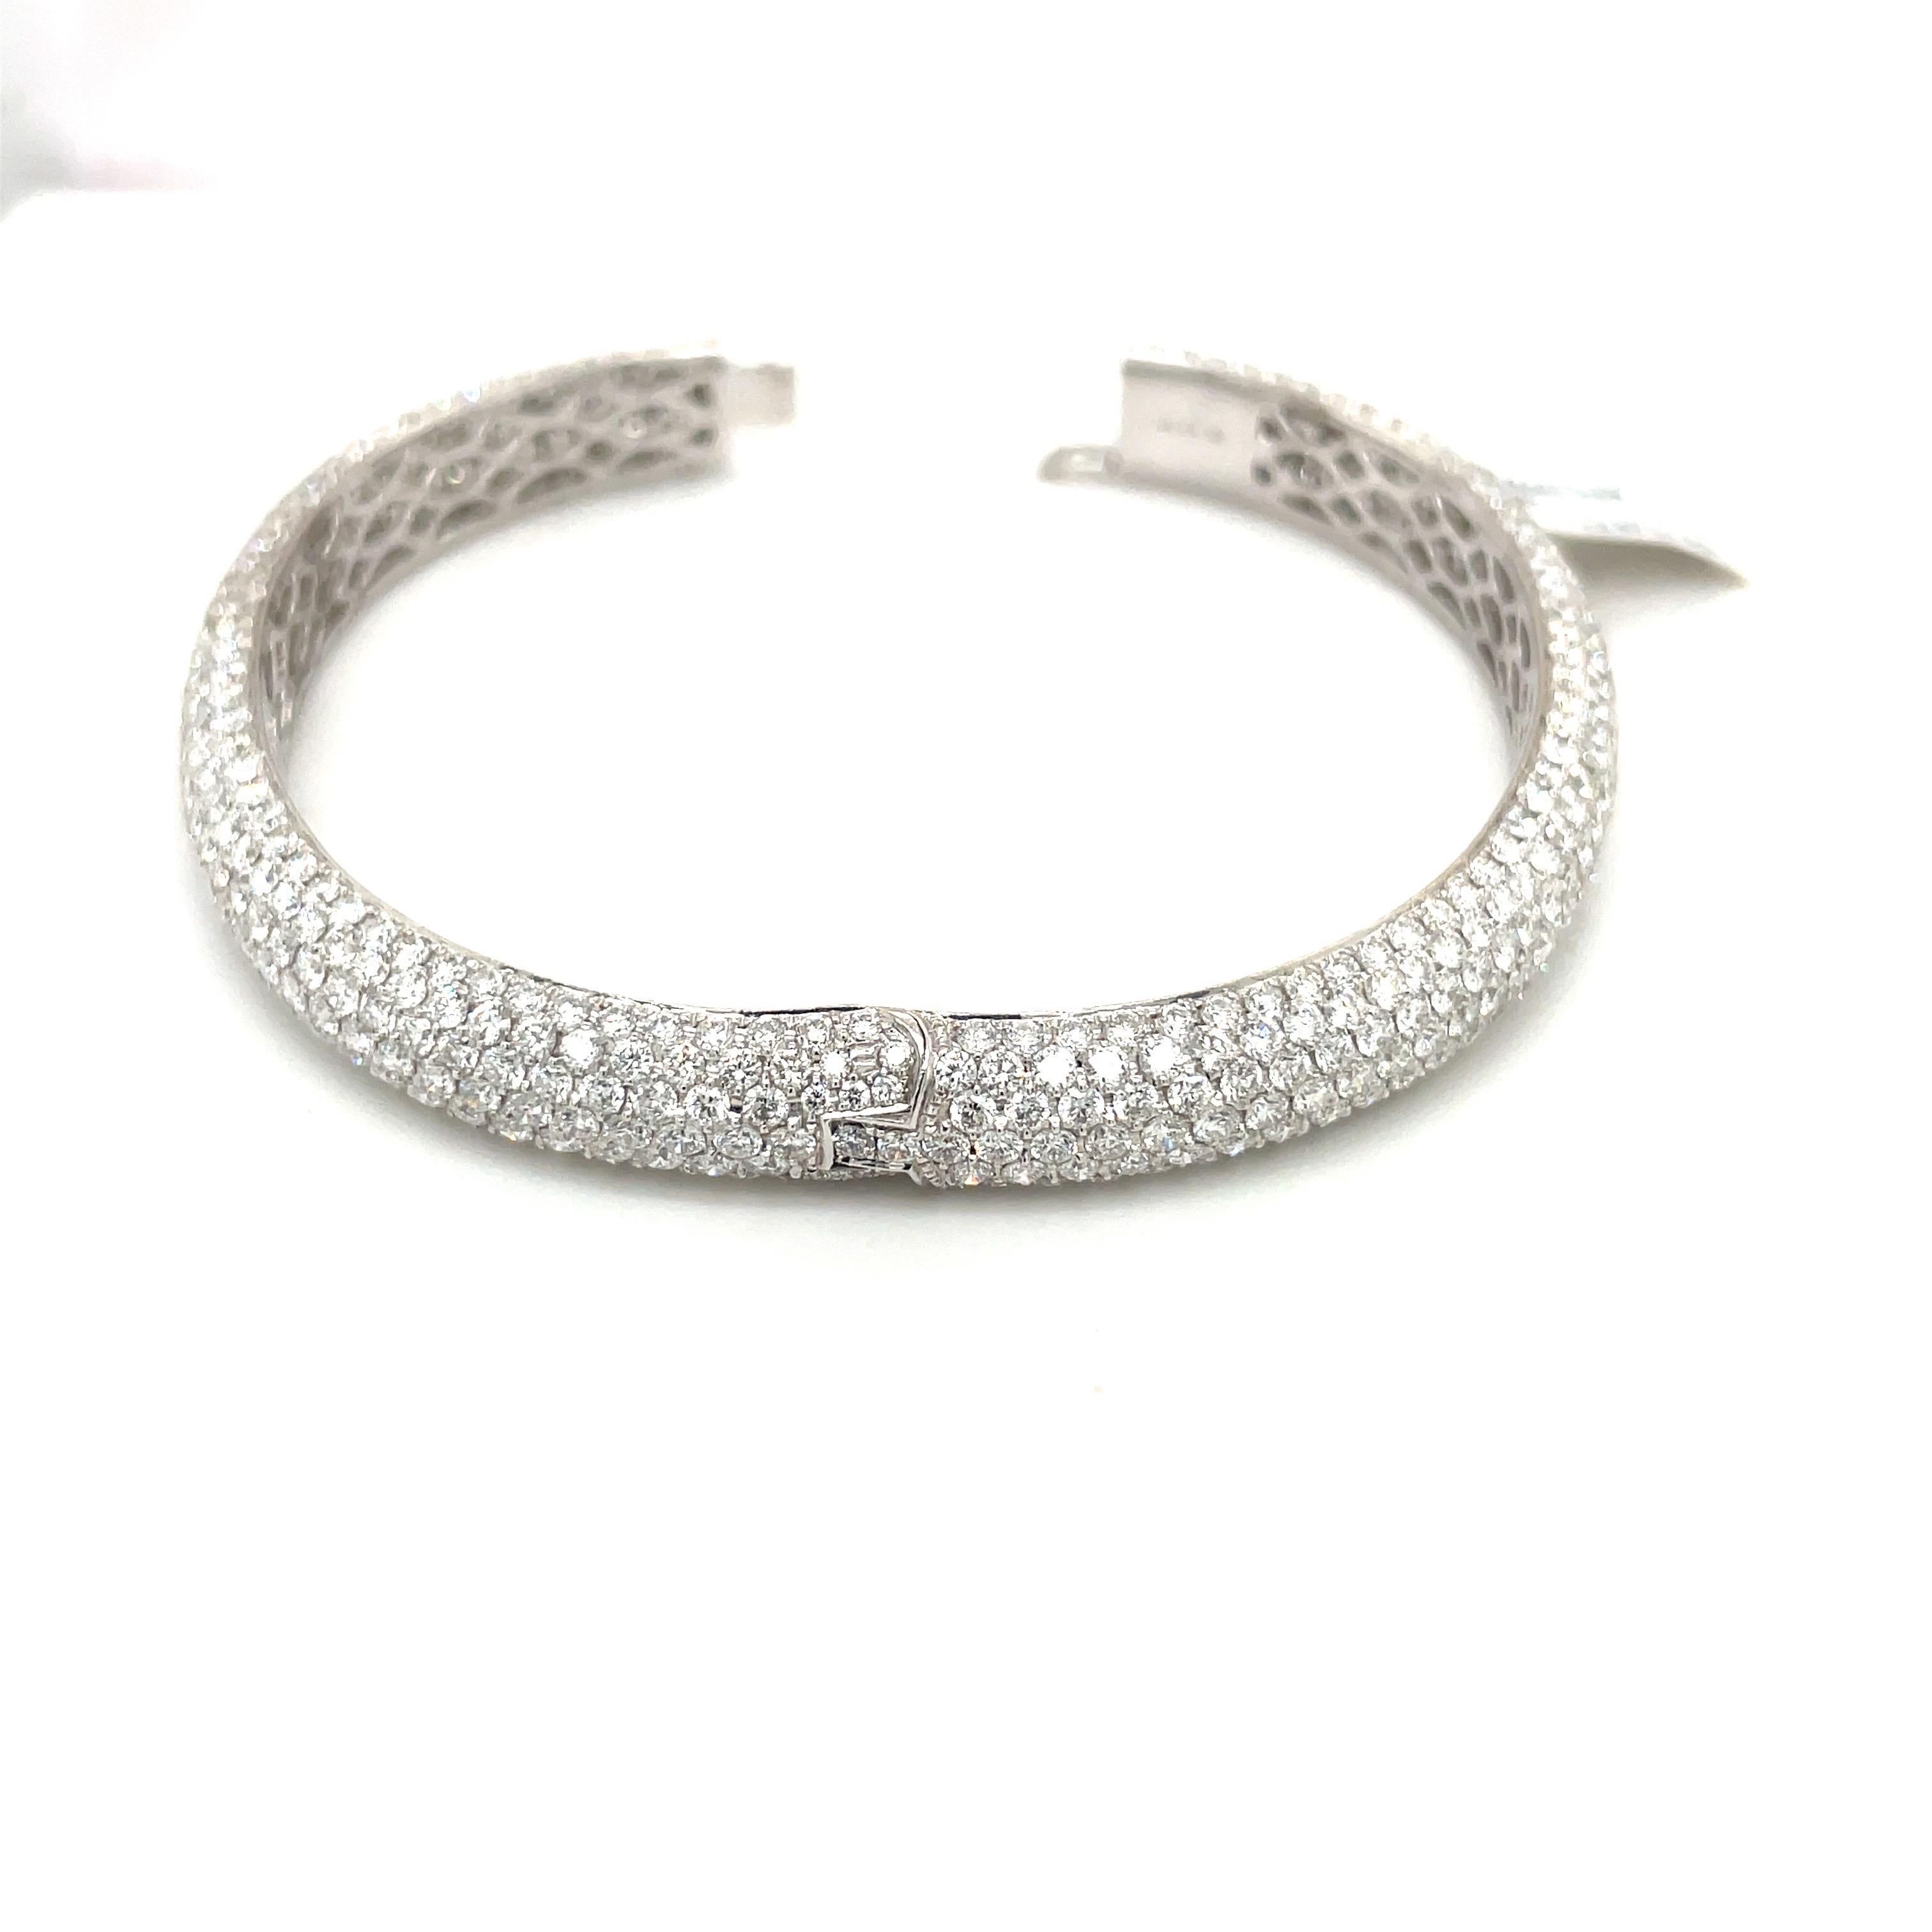 Magnificently set 18 karat white gold pave' diamond bangle bracelet. The oval shaped bracelet has a total of 621 round brilliant diamonds with a total weight of 15.68 carats. The beauty of this bracelet is the oval shape, which  sits so comfortably